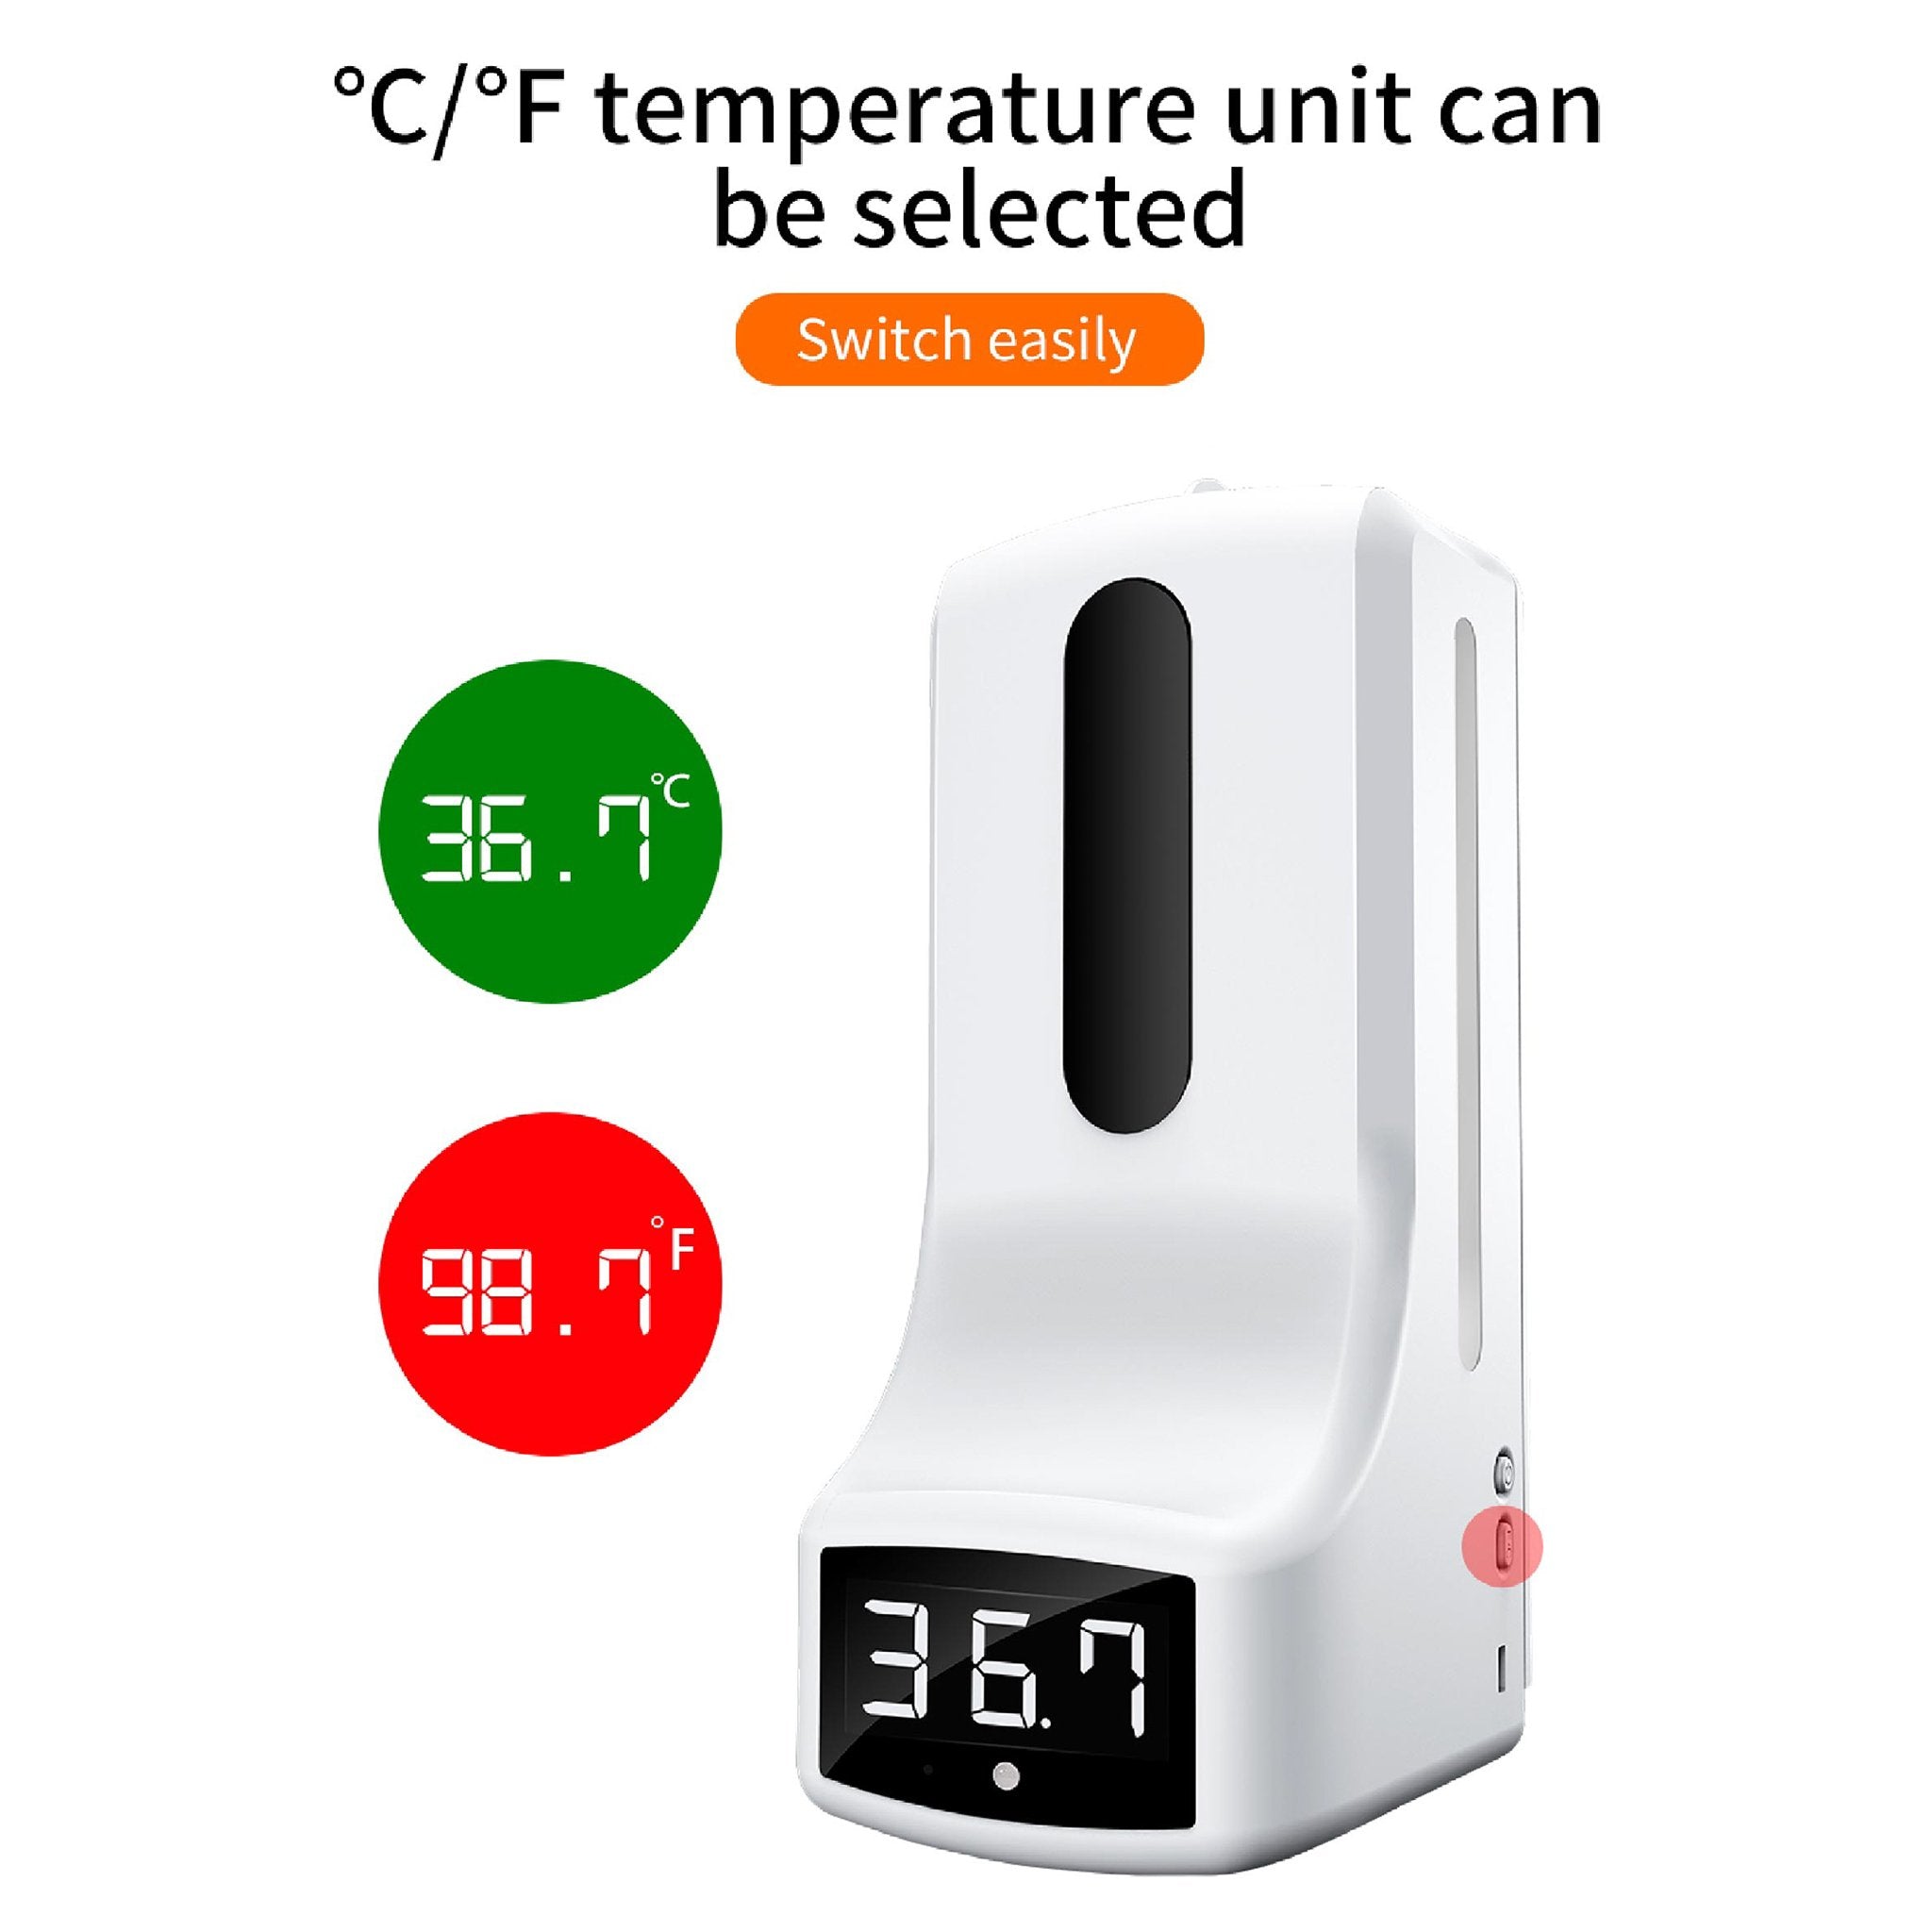 Automatic Soap Dispenser with Infrared Thermometer